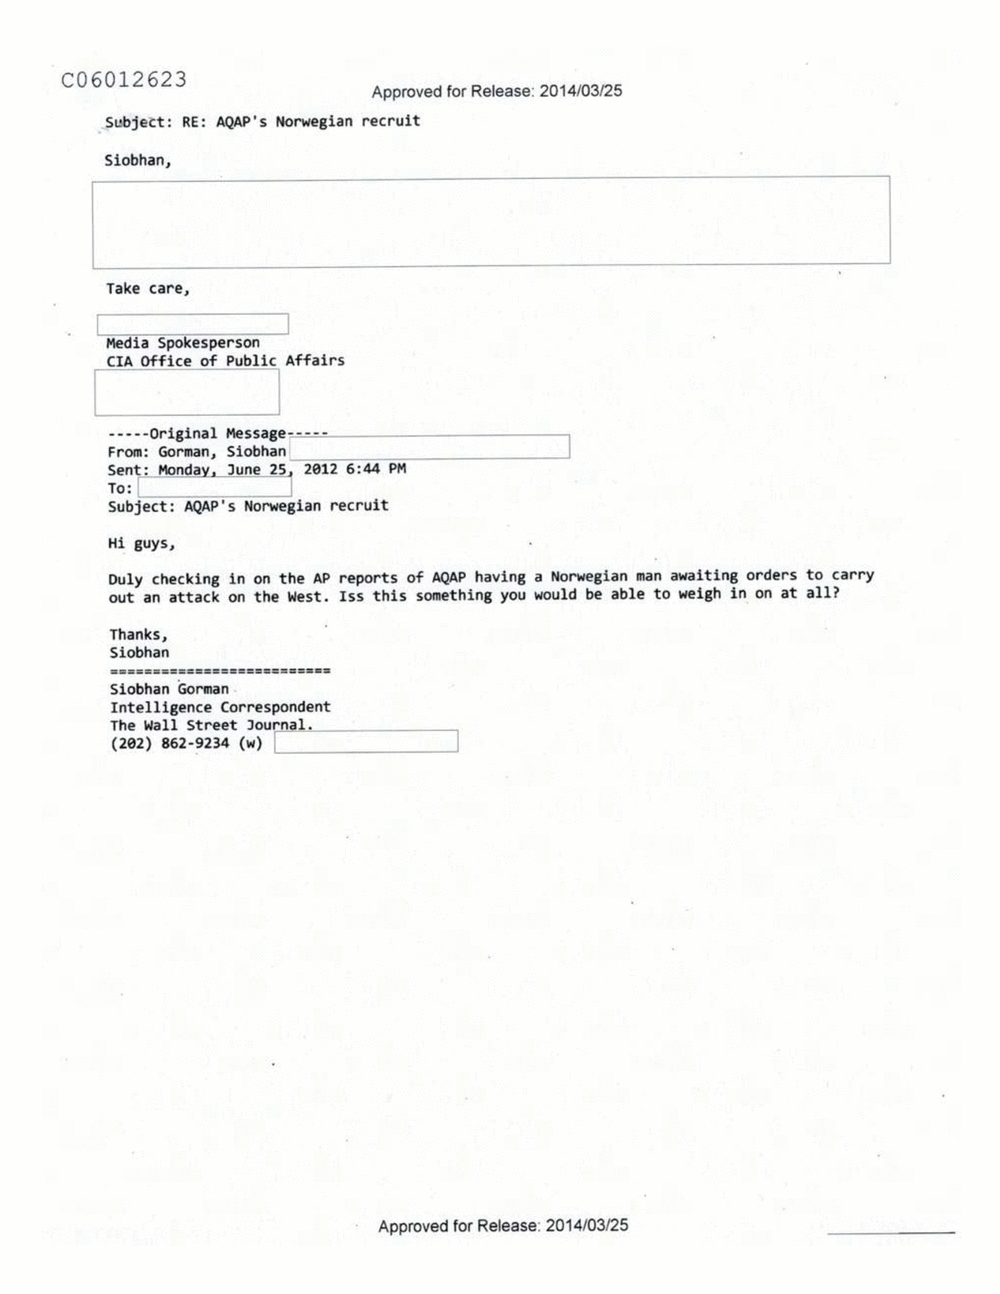 Page 178 from Email Correspondence Between Reporters and CIA Flacks